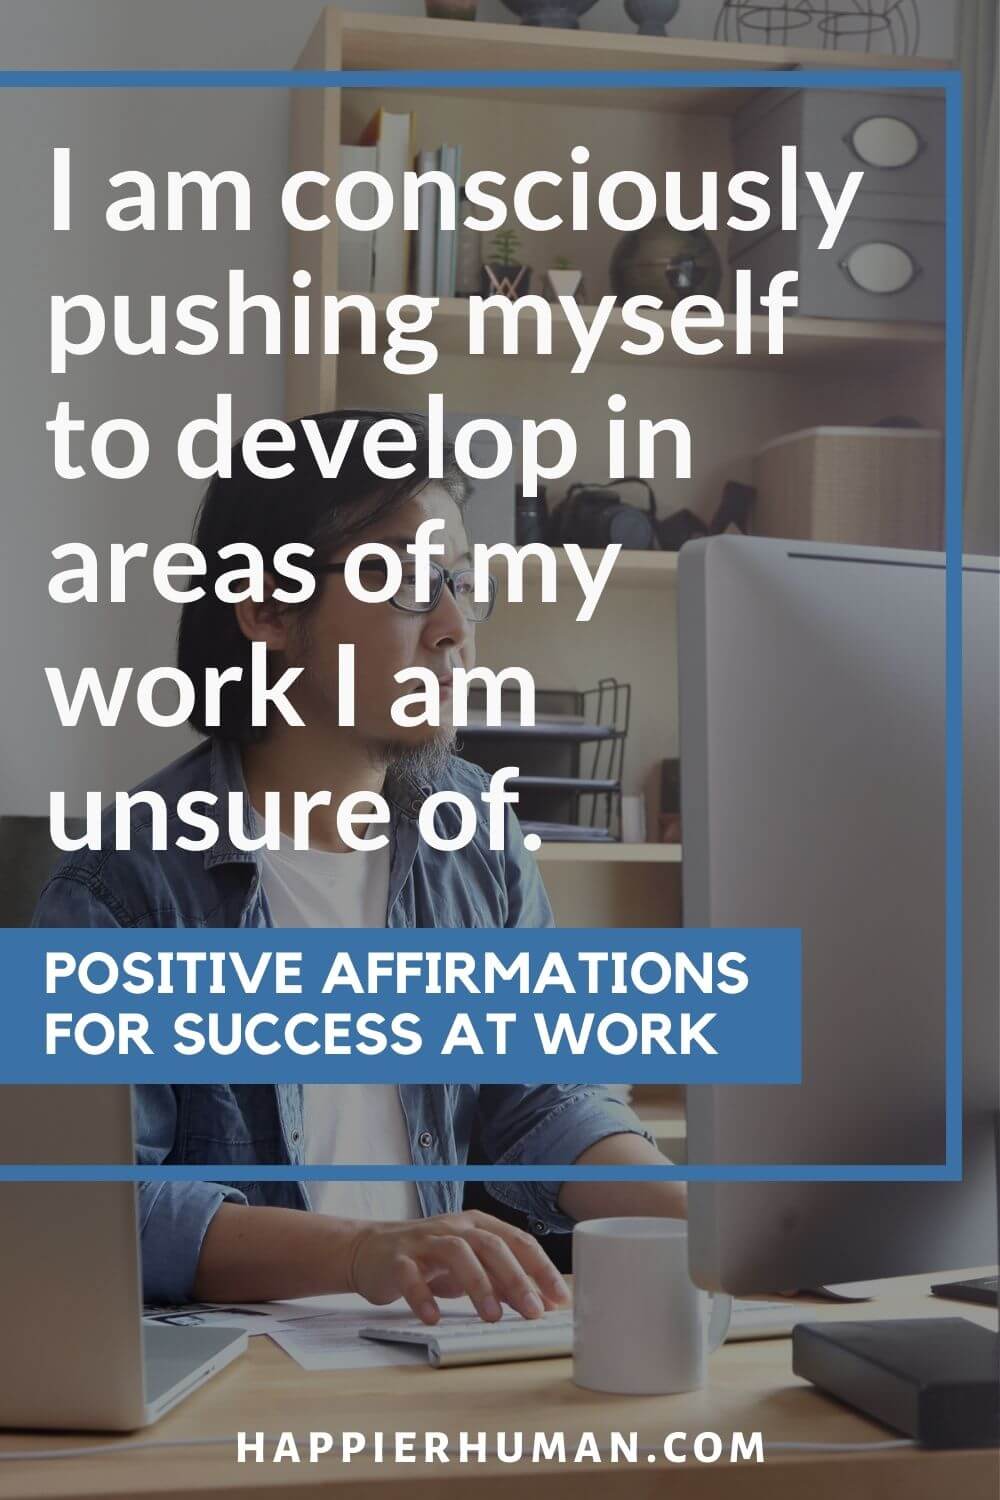 Positive Affirmations for Work - I am consciously pushing myself to develop in areas of my work I am unsure of. | wednesday affirmations for work | affirmations for work week | positive affirmations for difficult colleagues